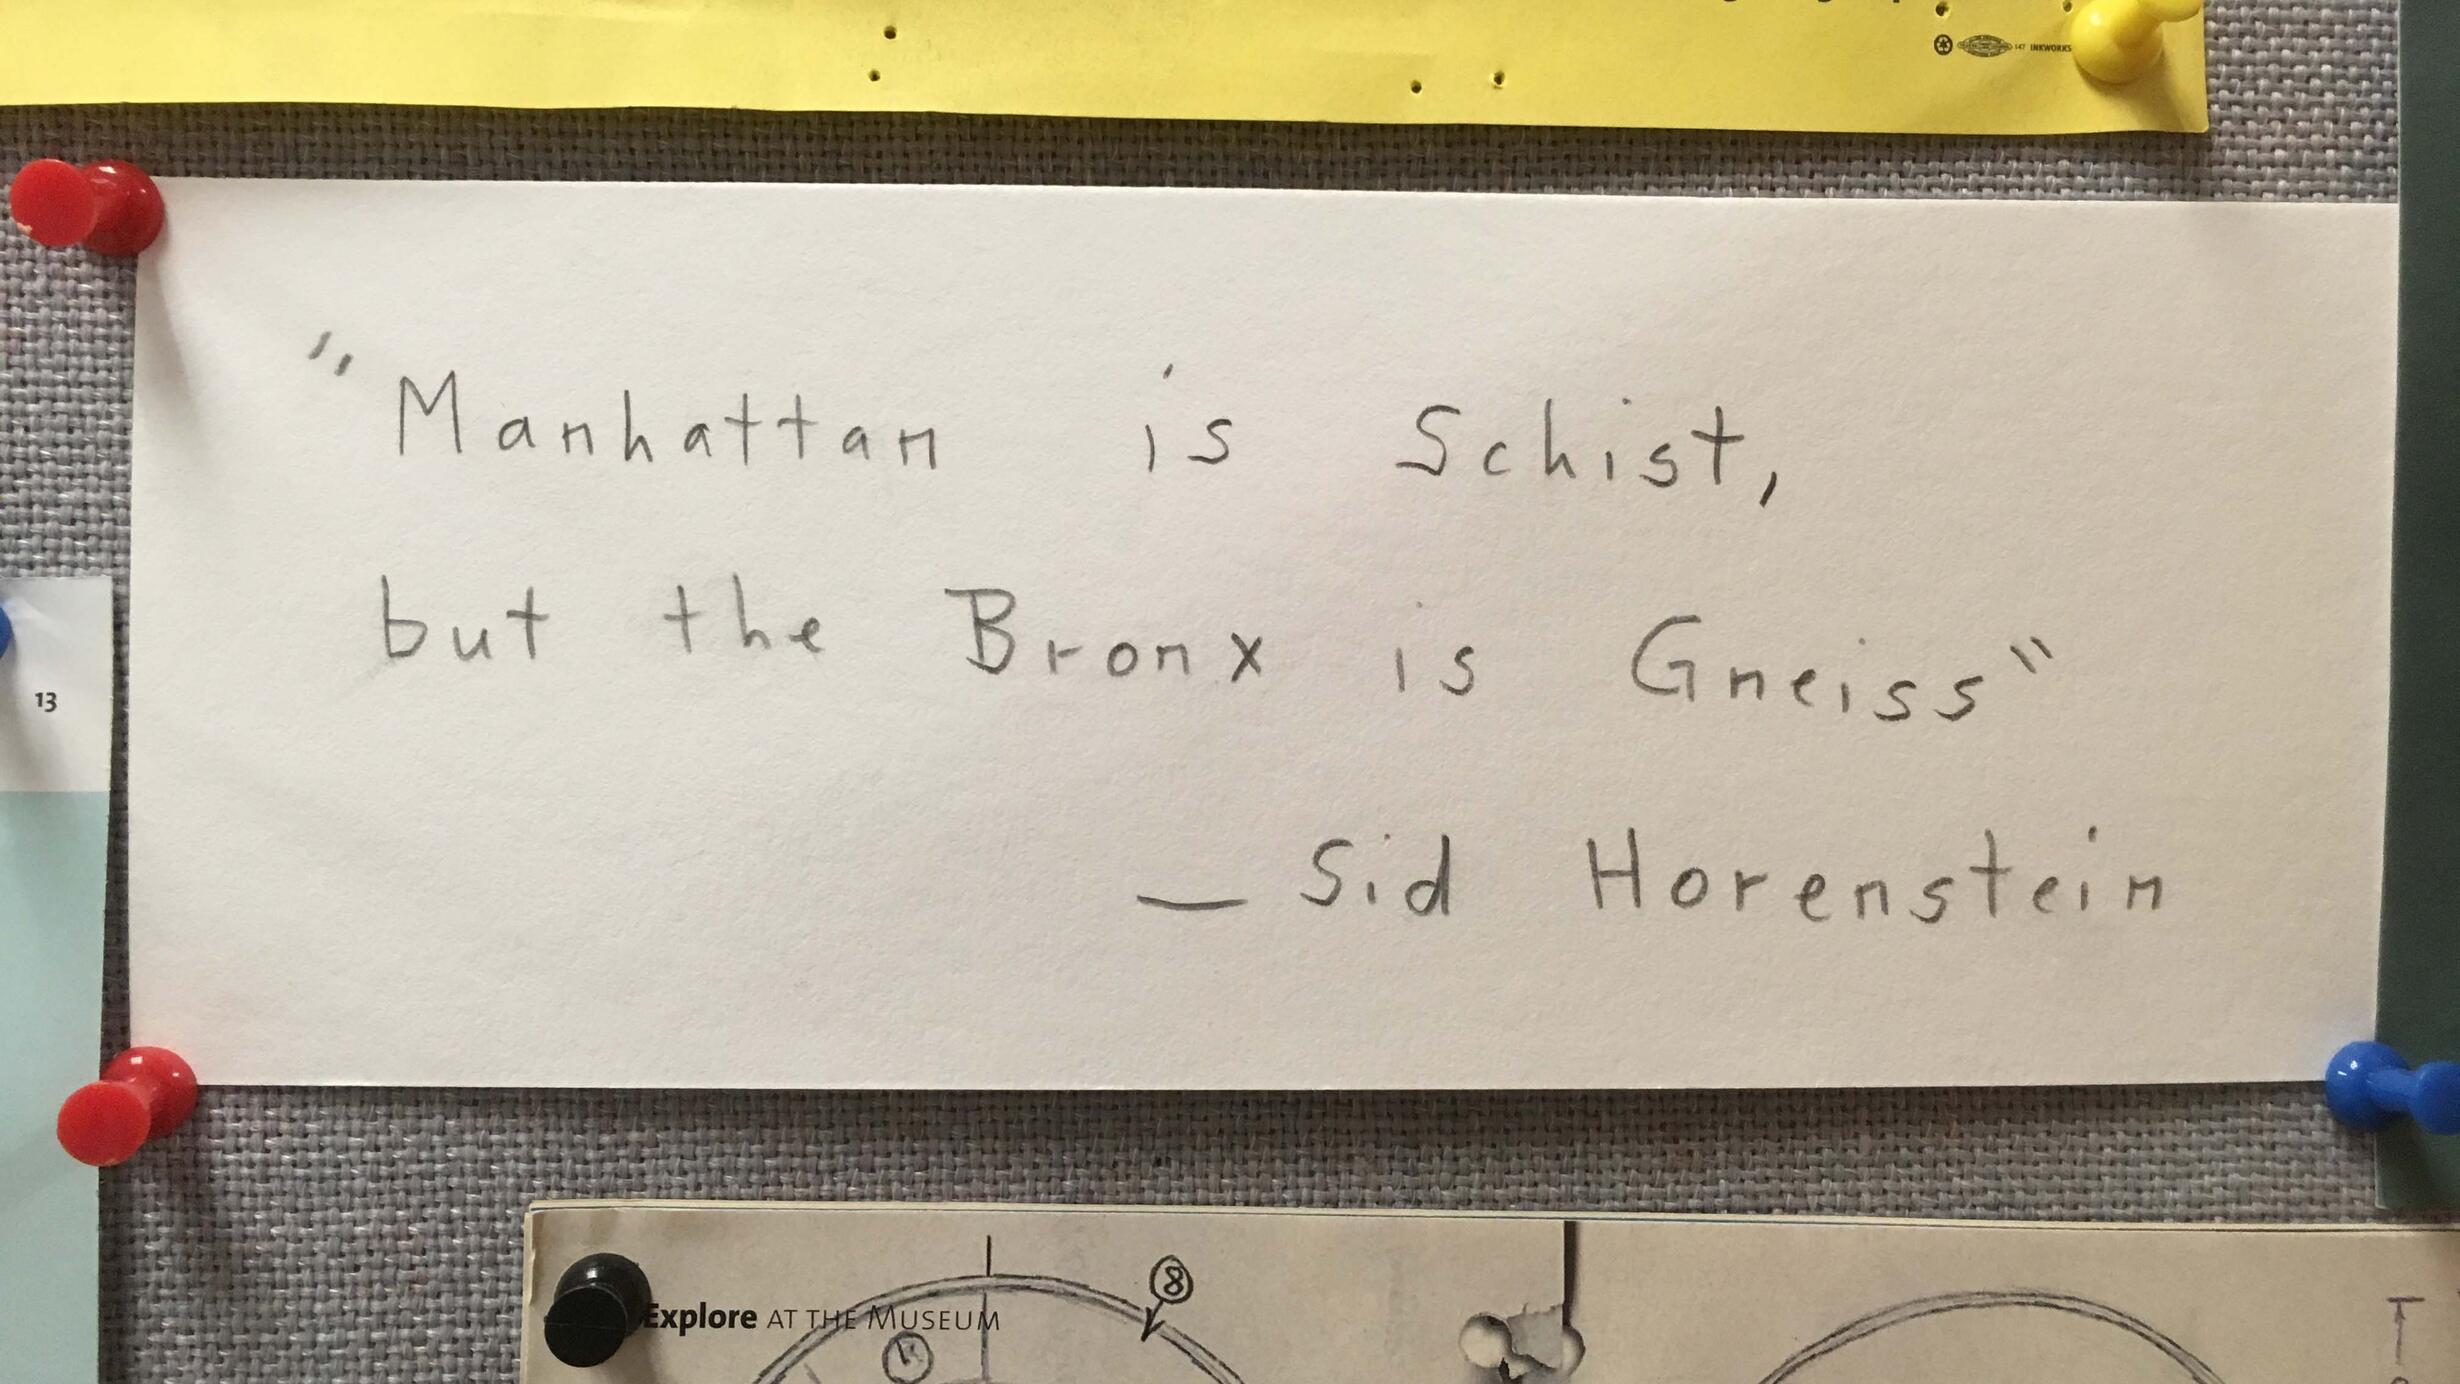 "Manhattan is schist, but the Bronx is gneiss. -Sid Horenstein" written on piece of paper pinned onto a board beside other pieces of pinned paper.